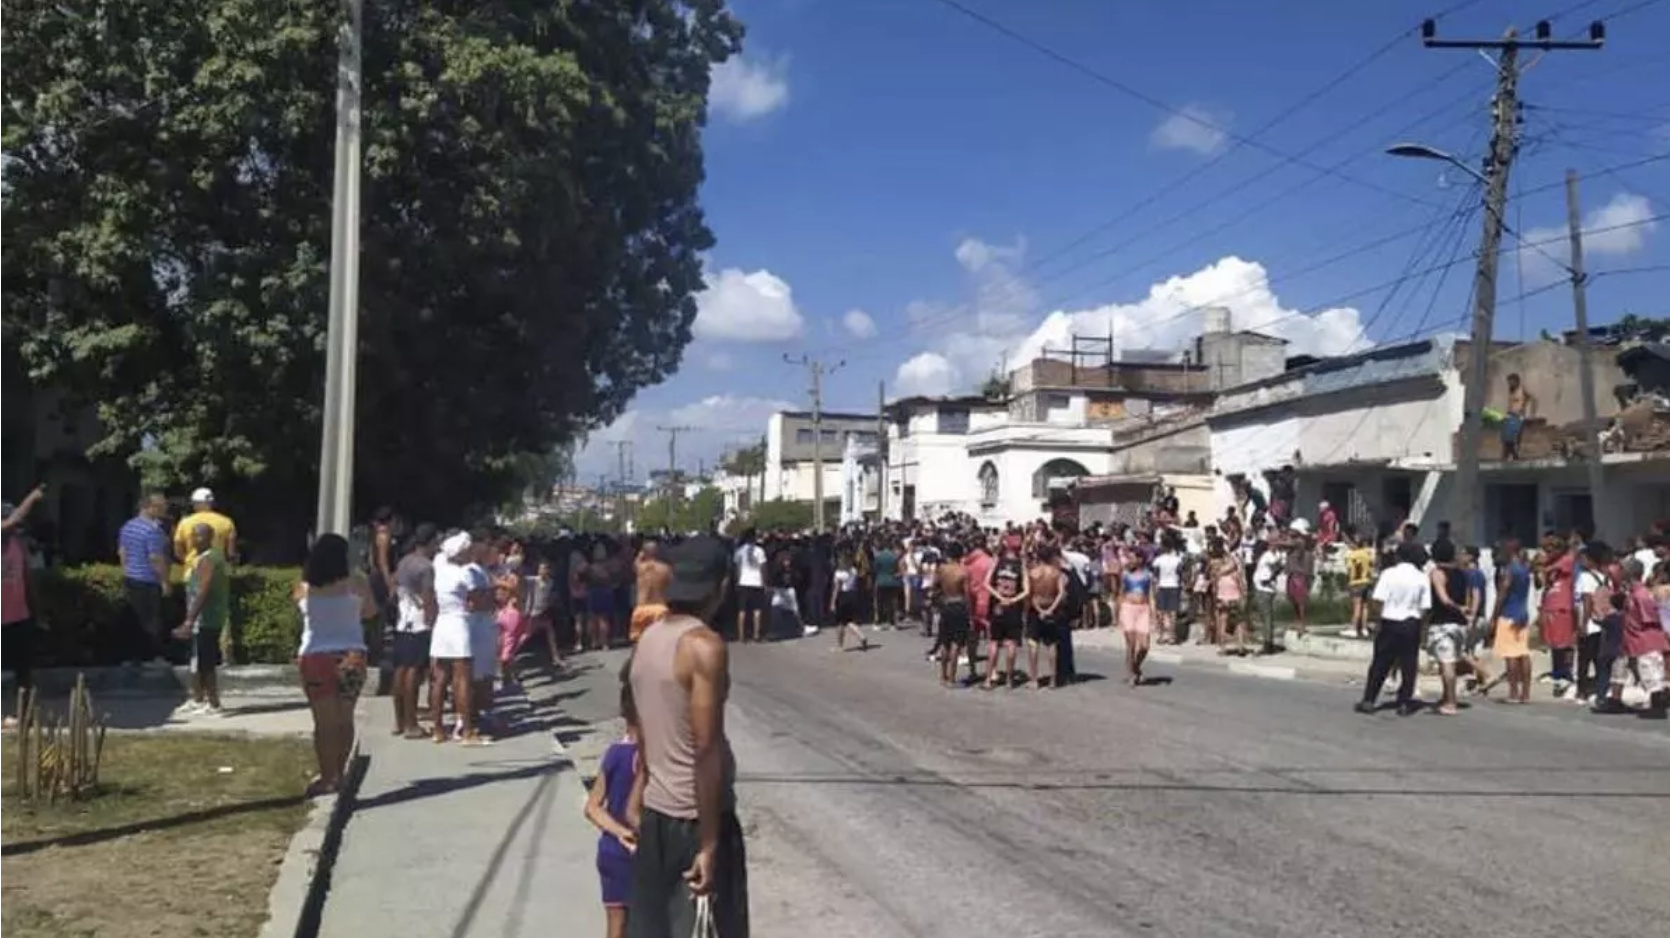 prisoners-defenders-raises-the-number-of-political-prisoners-in-cuba-to-1,092-after-the-march-protests